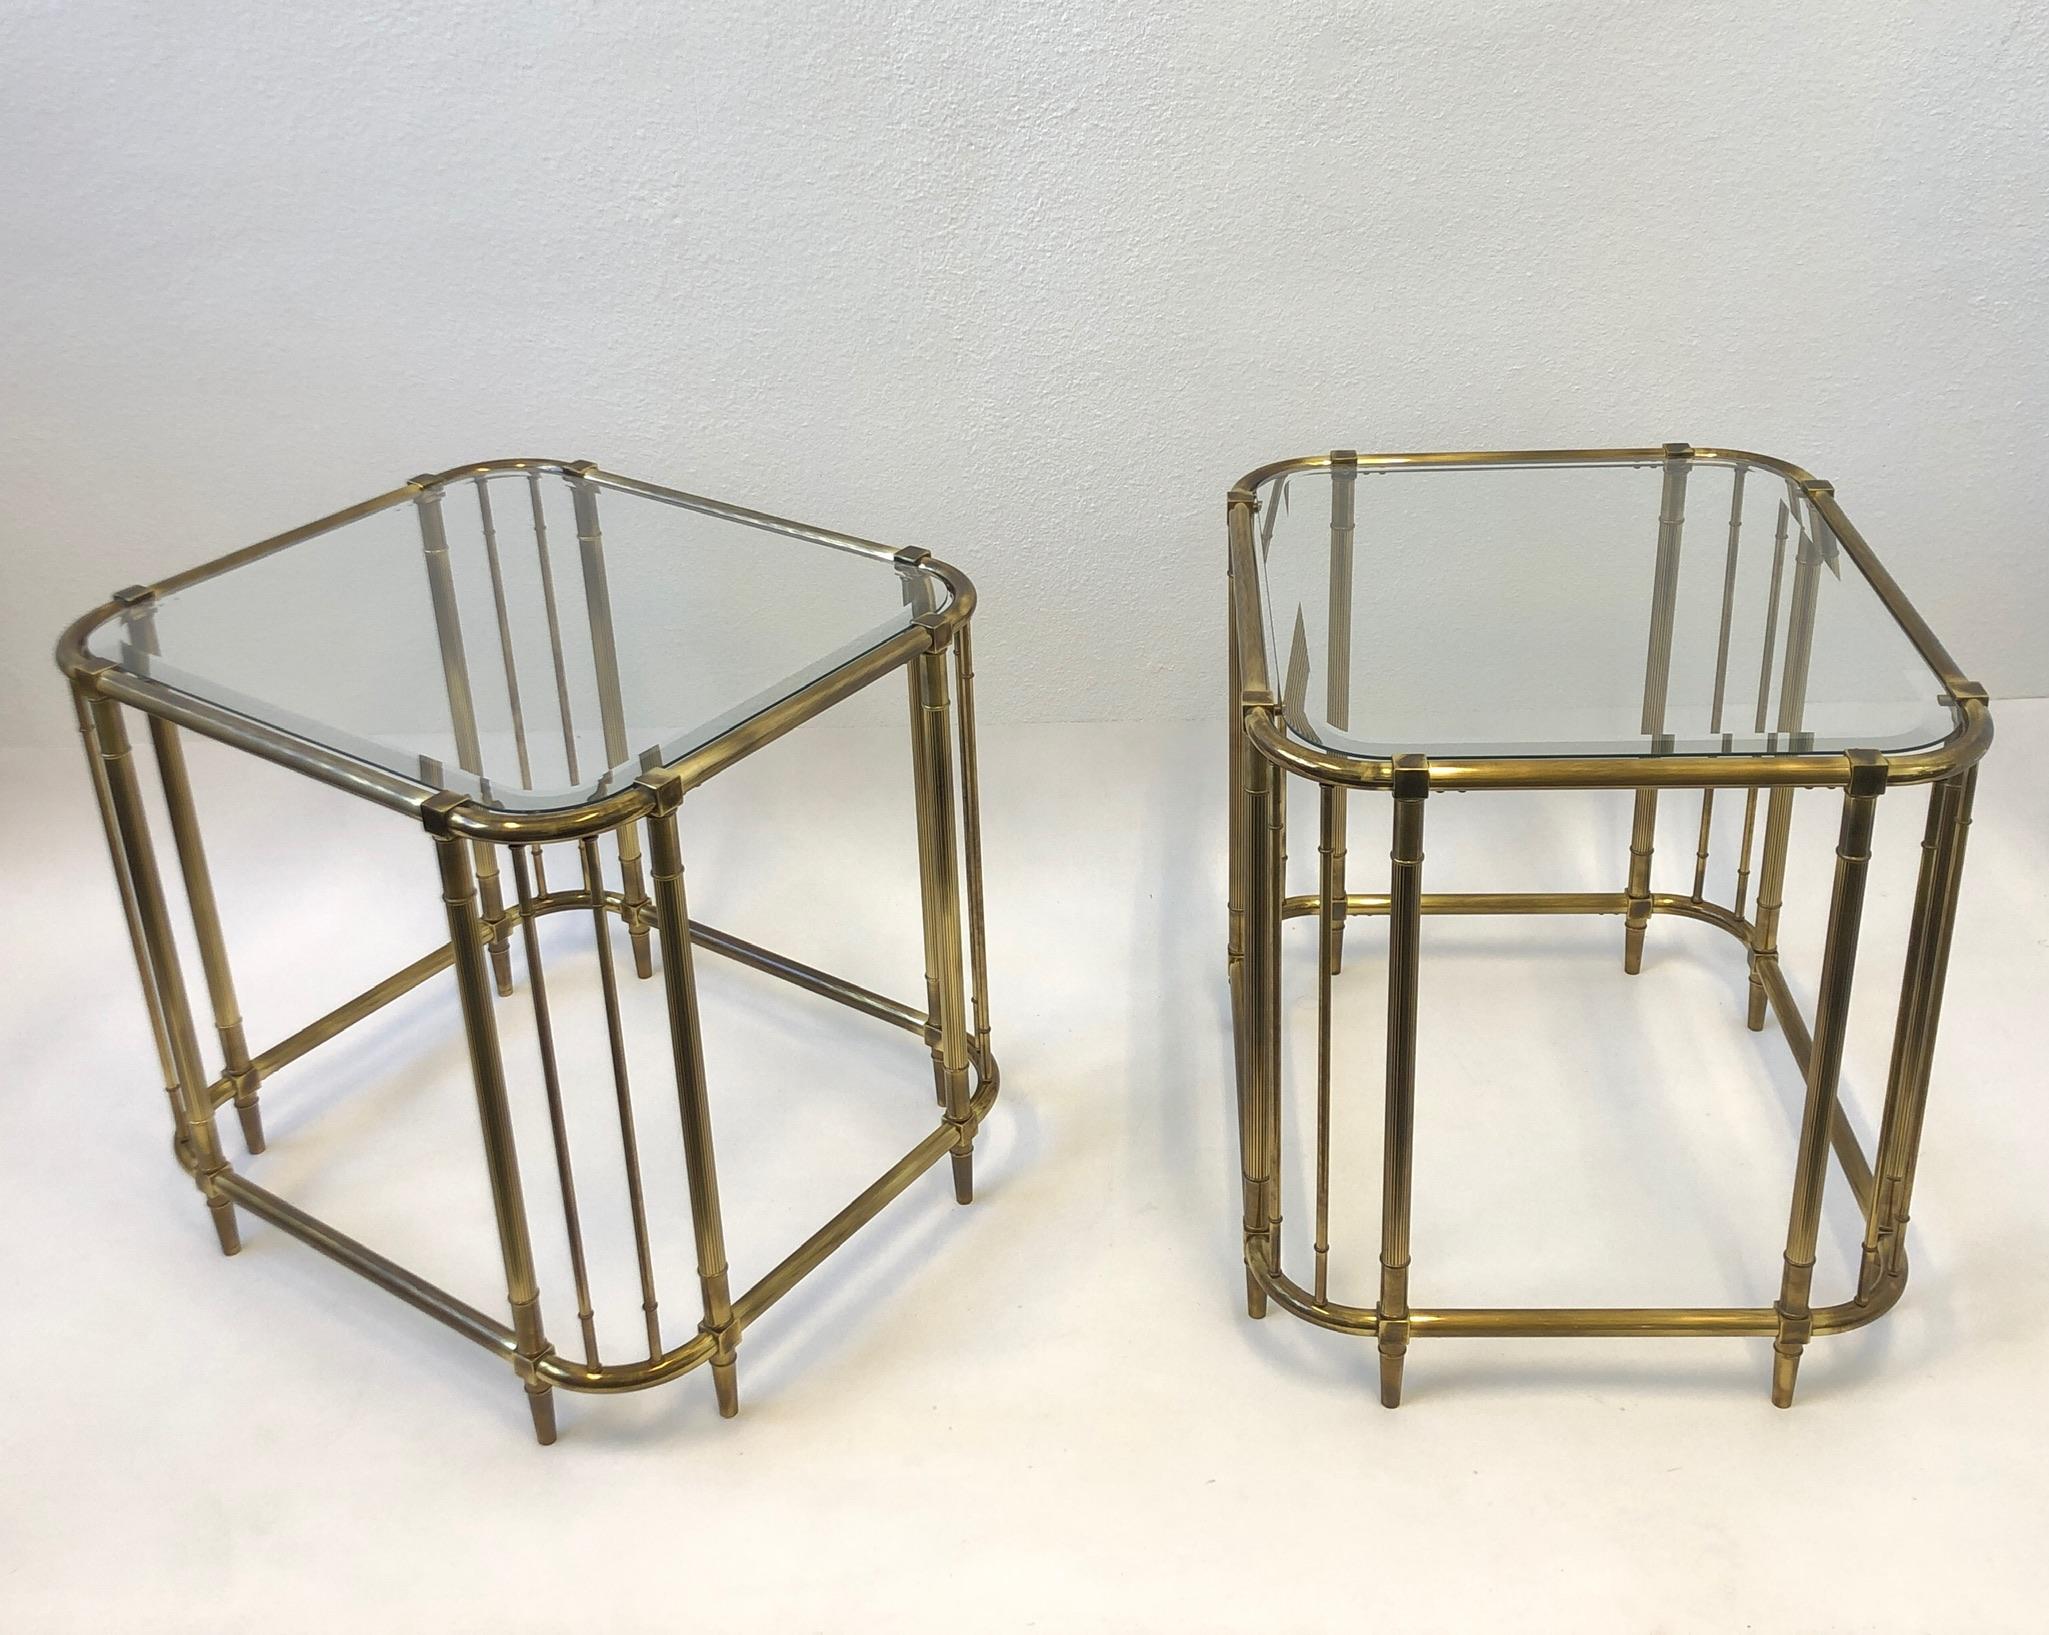 Modern Pair of Aged Brass and Glass Side Tables by Mastercraft